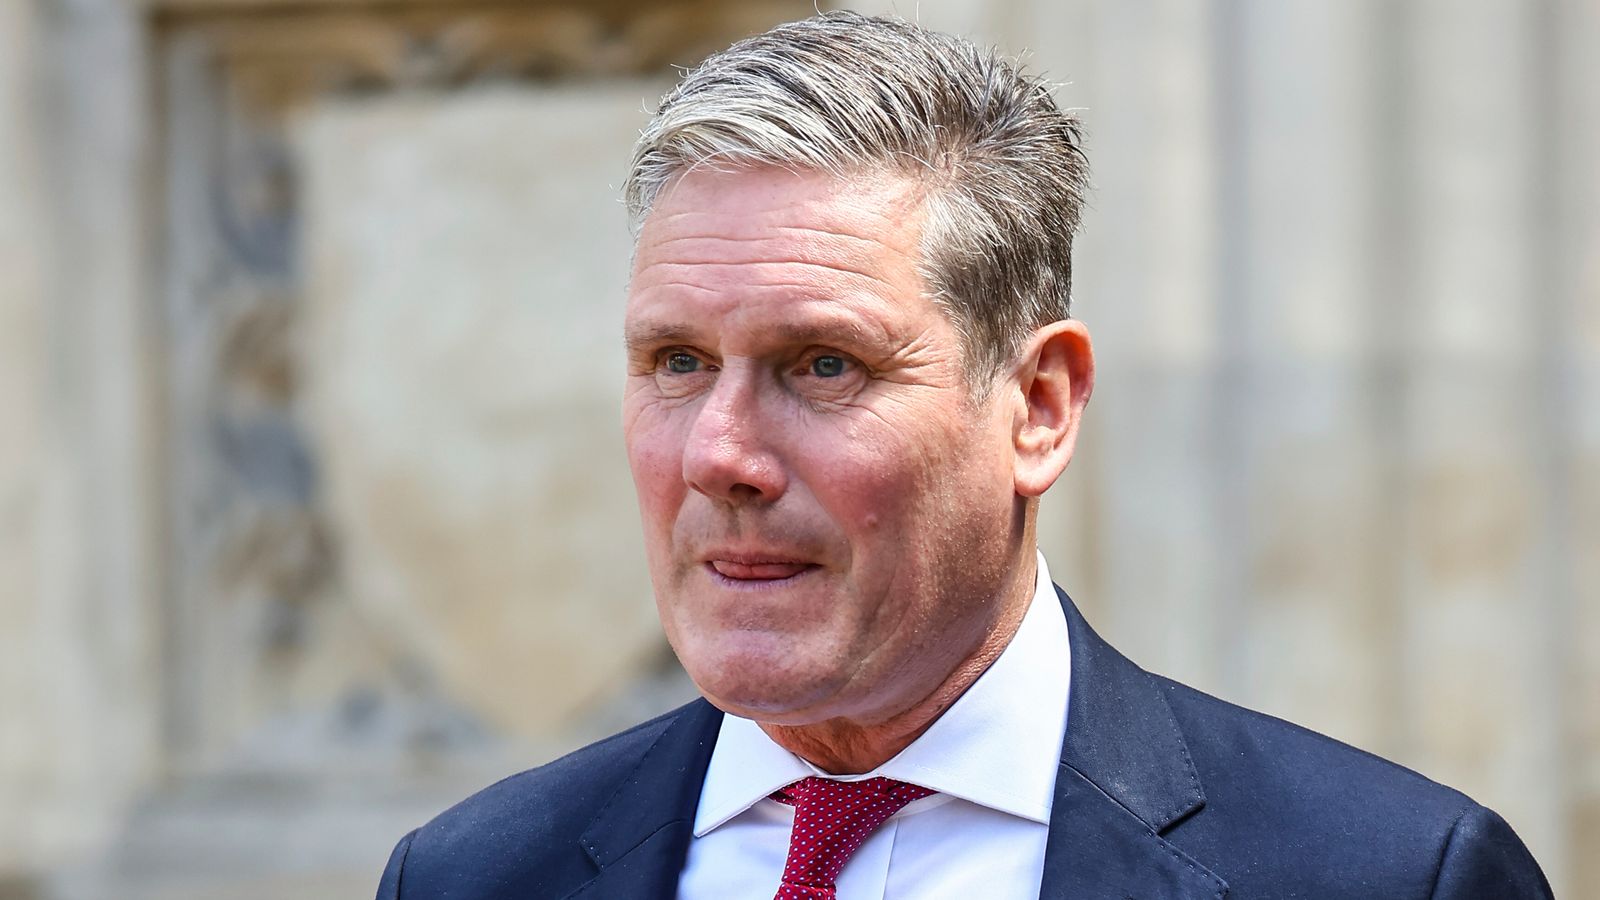 Mosque that hosted Sir Keir Starmer apologises for 'hurt and confusion' caused by visit